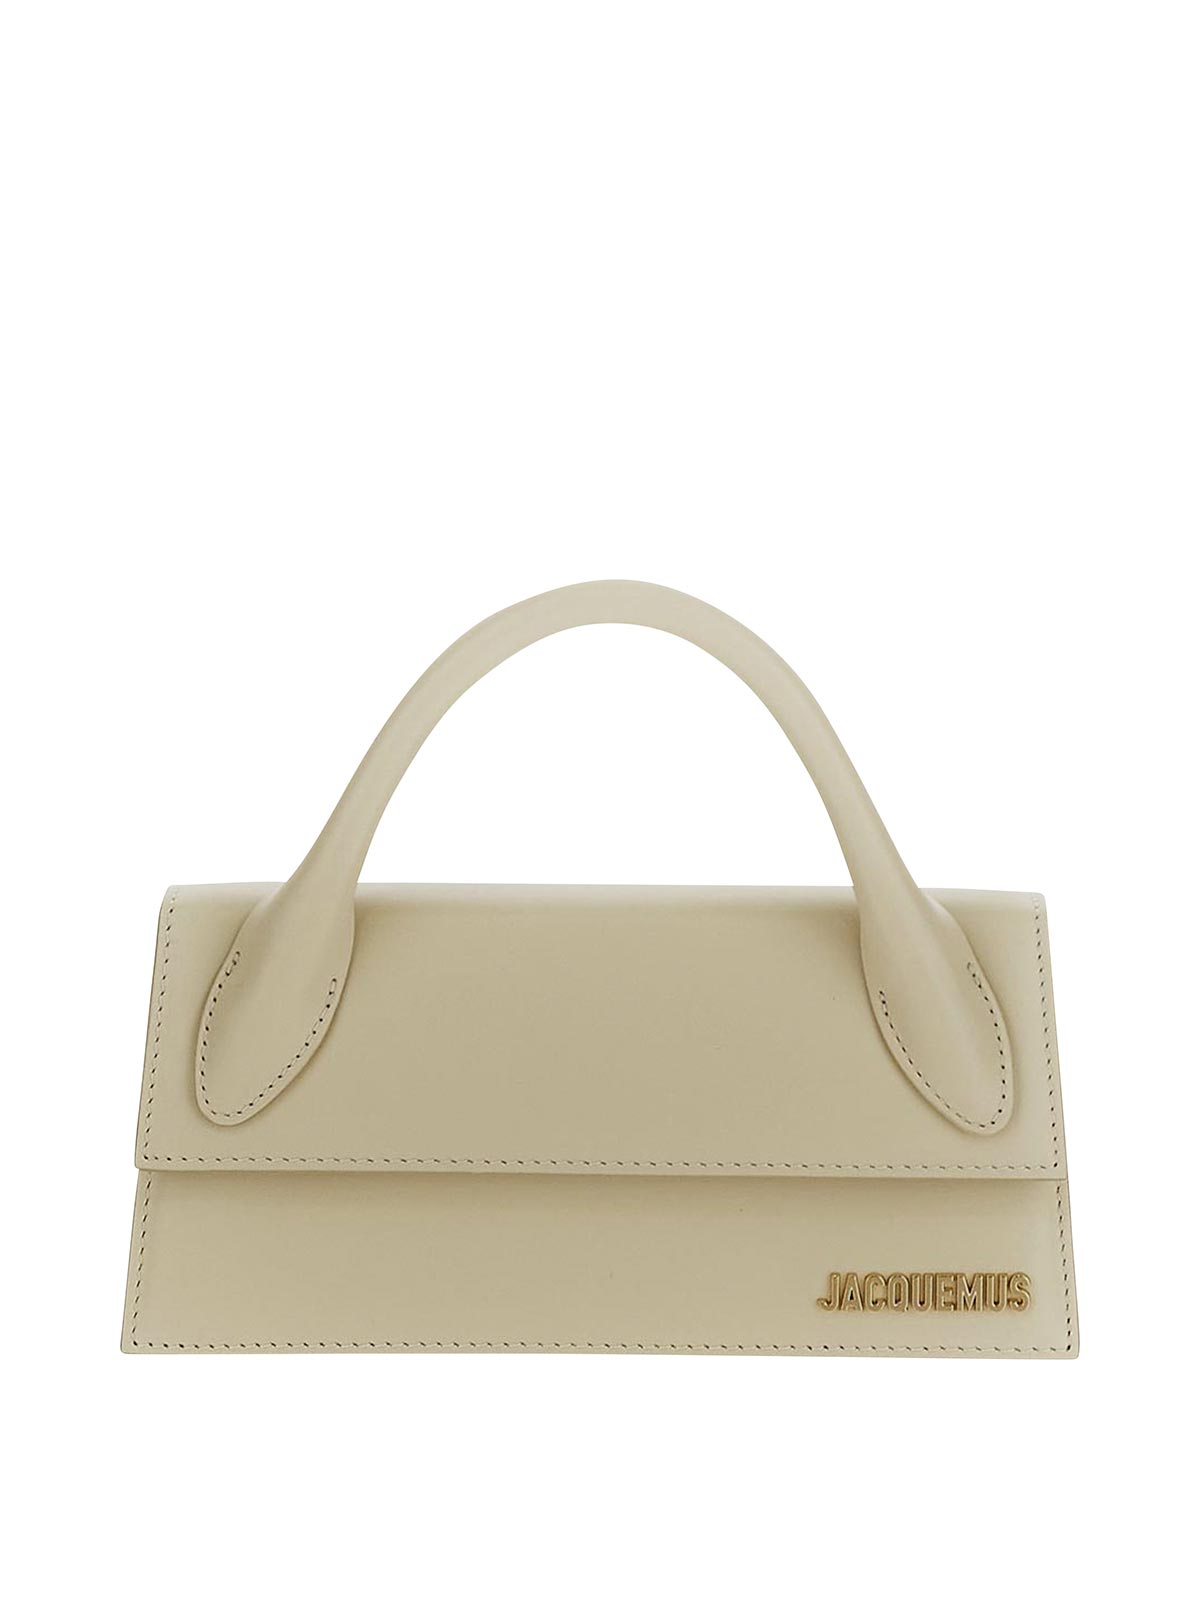 Jacquemus Handbag In Ivory With Reinforced Top In White